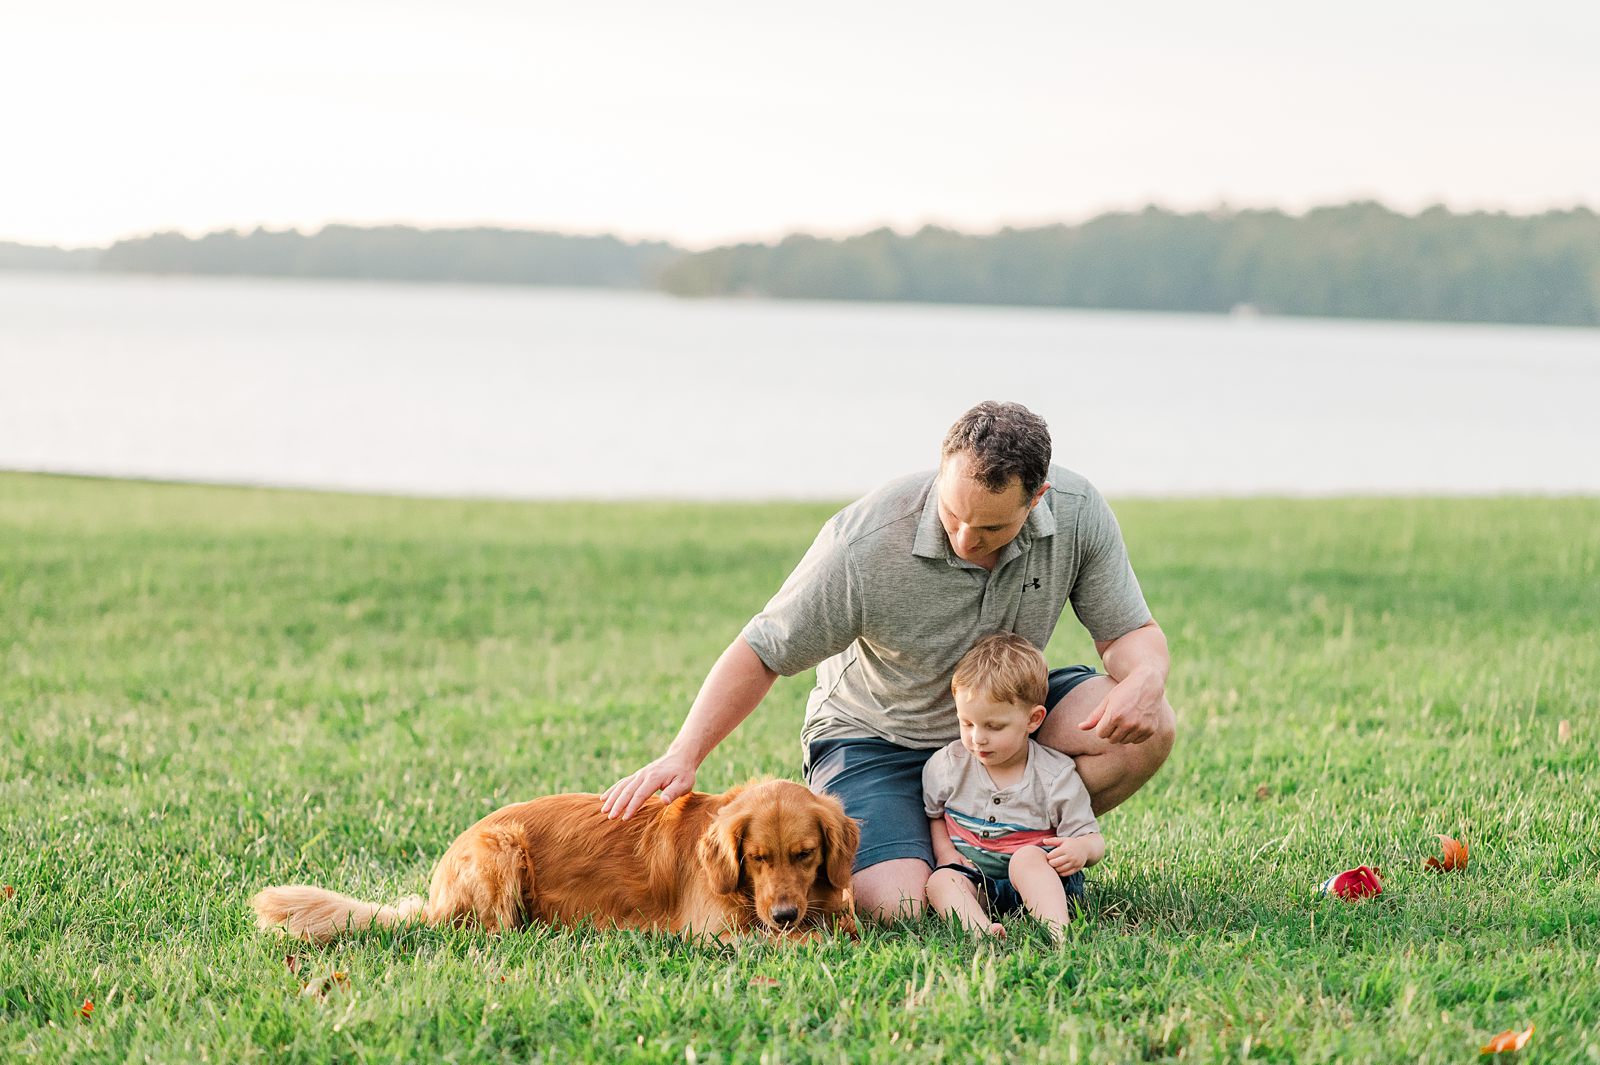 A Summer Vacation Lake Anna Family Session by Richmond Family Photographer Kailey Brianne Photography. 